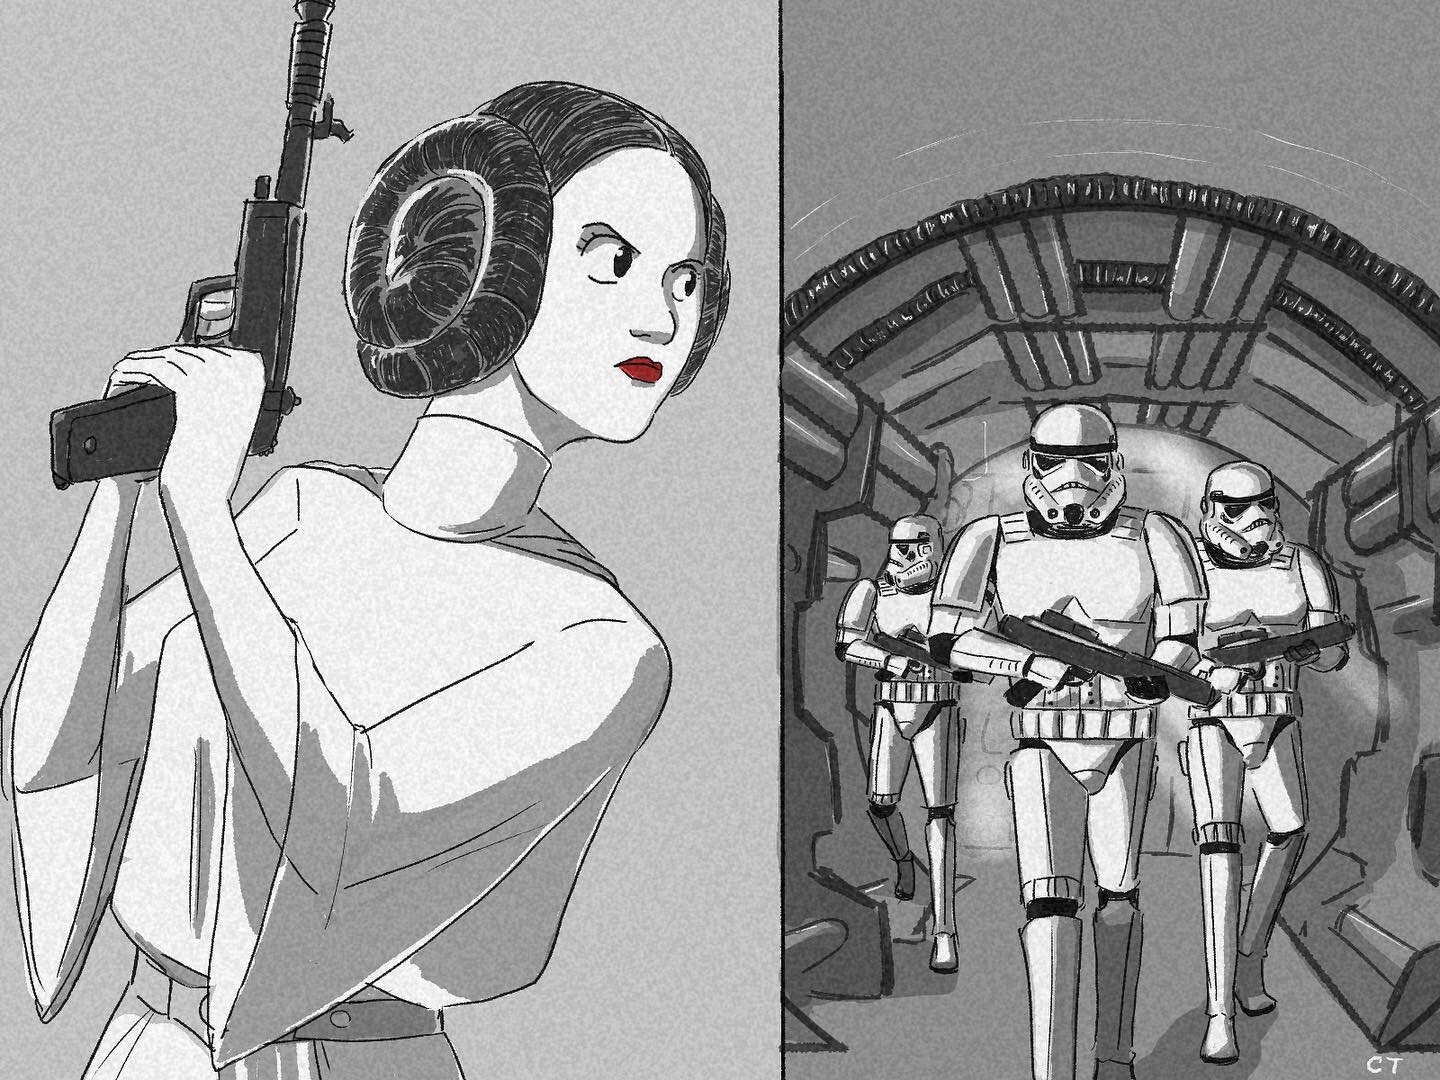 May the Fourth be with you
&bull;
&bull;
&bull;
#maythe4thbewithyou #princessleia #stormtrooper #starwars #starwarsday #cjterryart